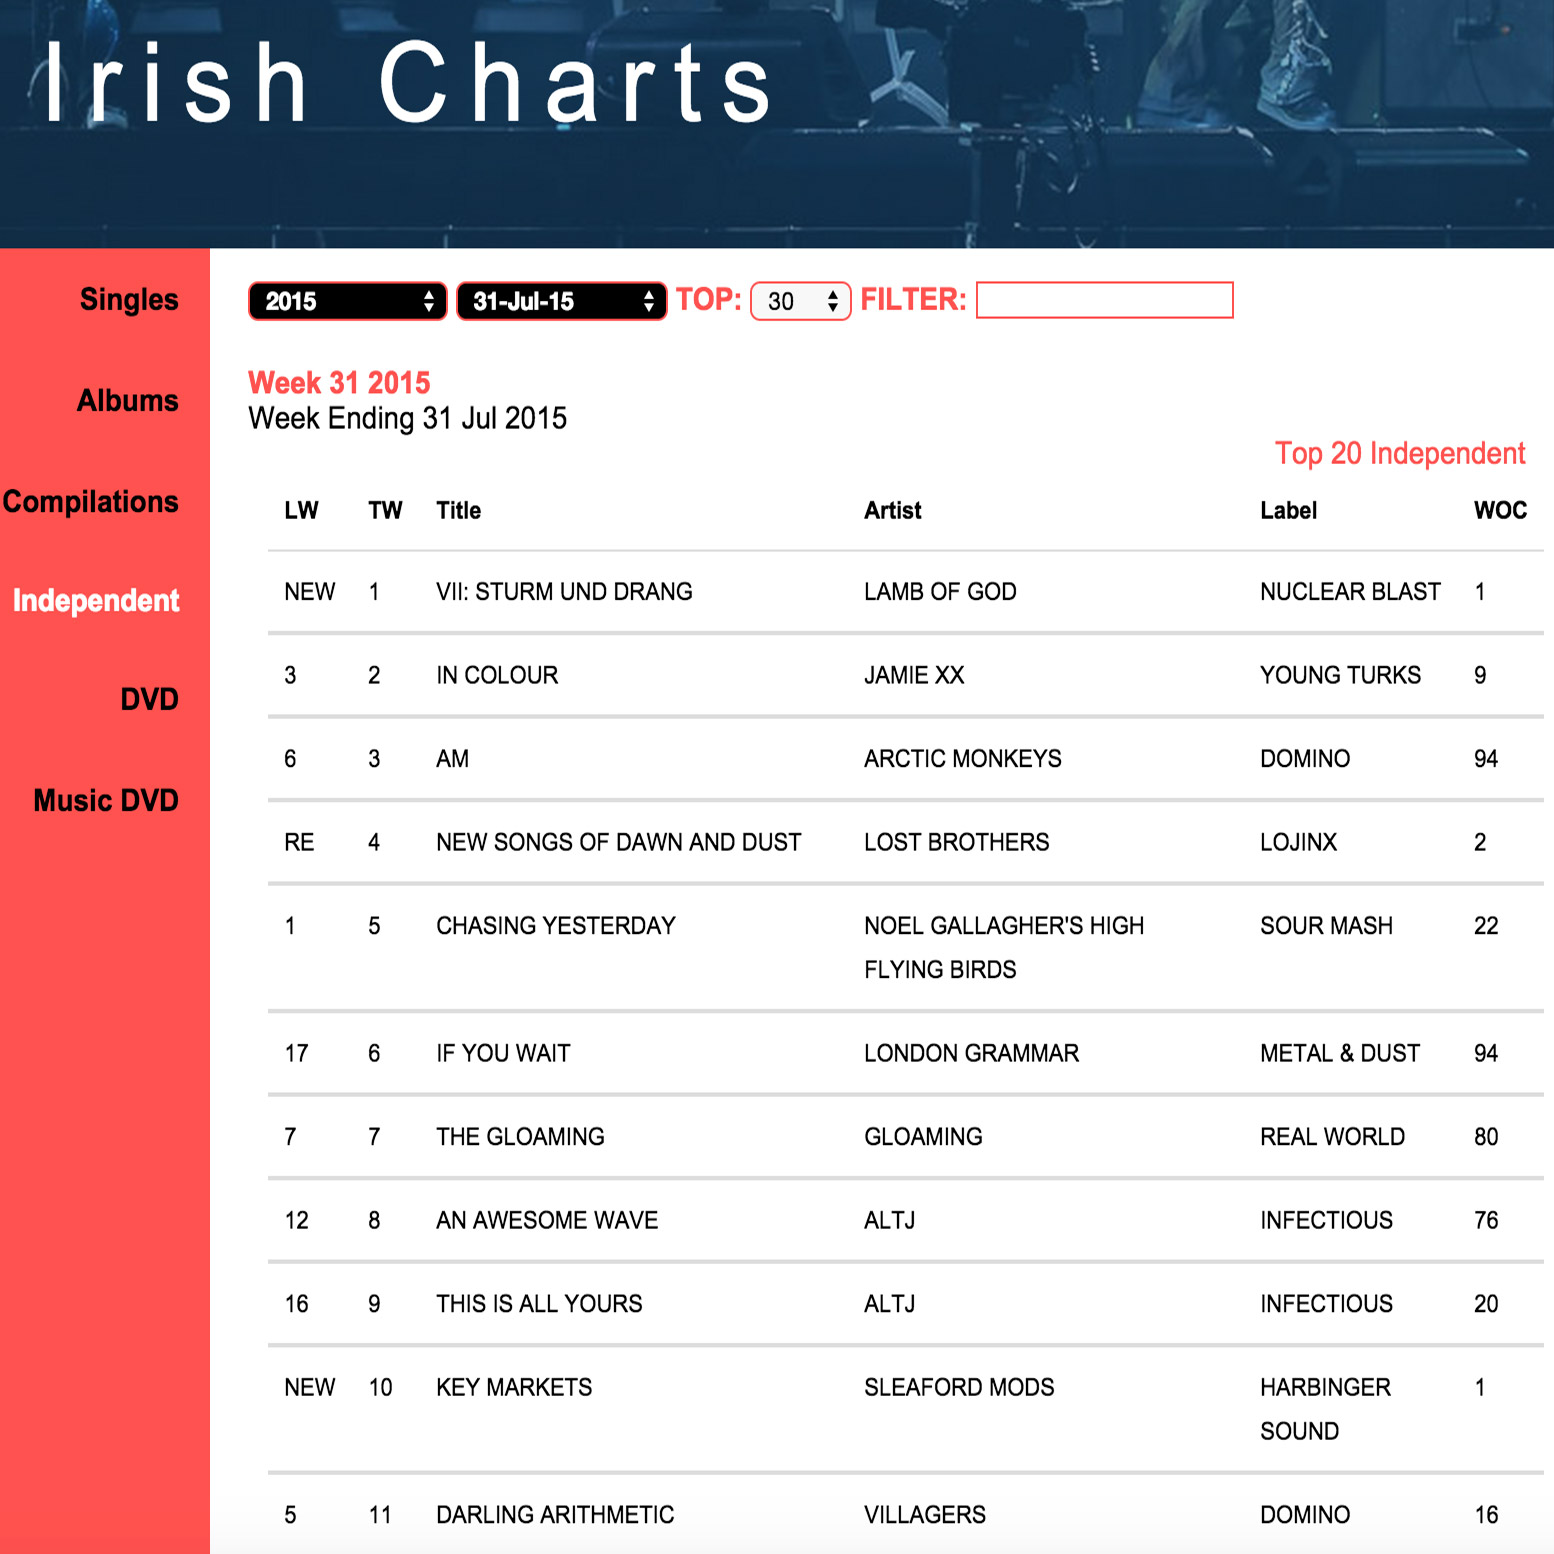 The Lost Brothers re-enter the Irish indie charts at no.4